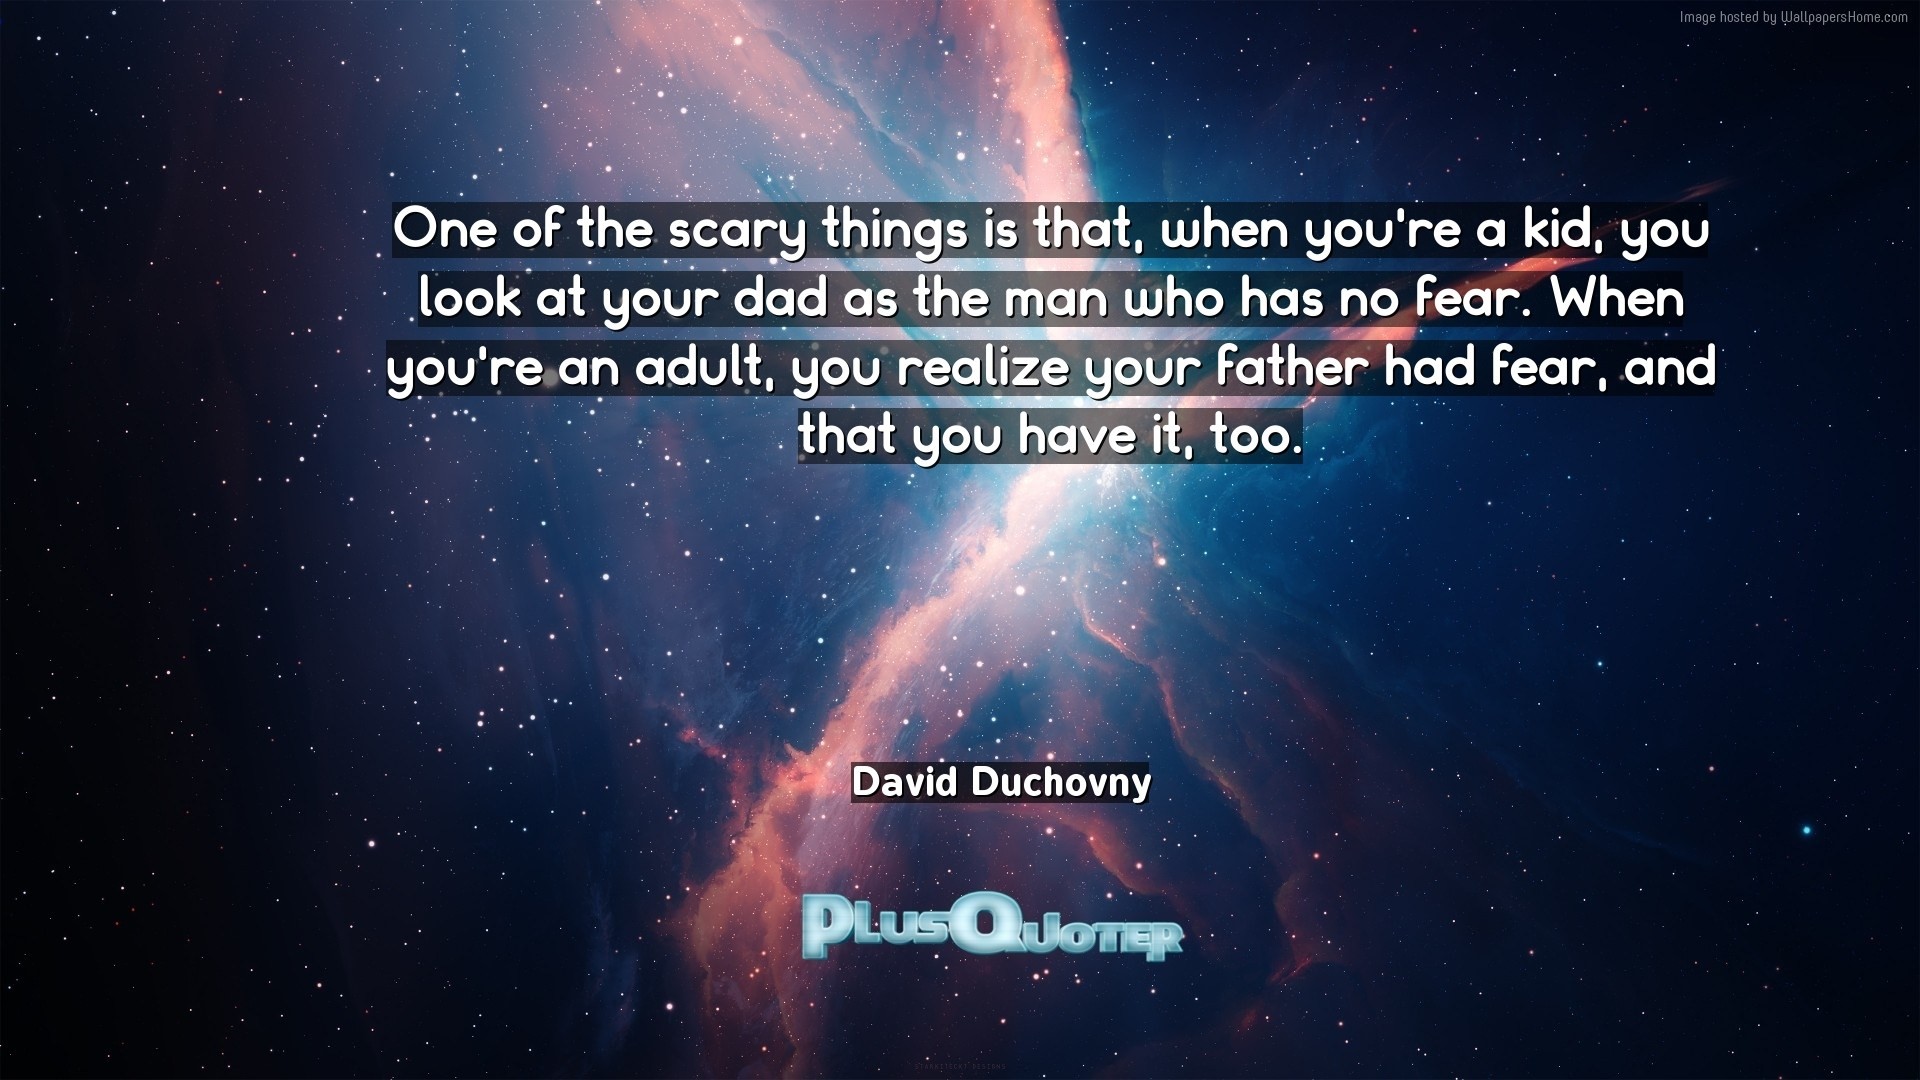 1920x1080 Download Wallpaper with inspirational Quotes- "One of the scary things is  that, when